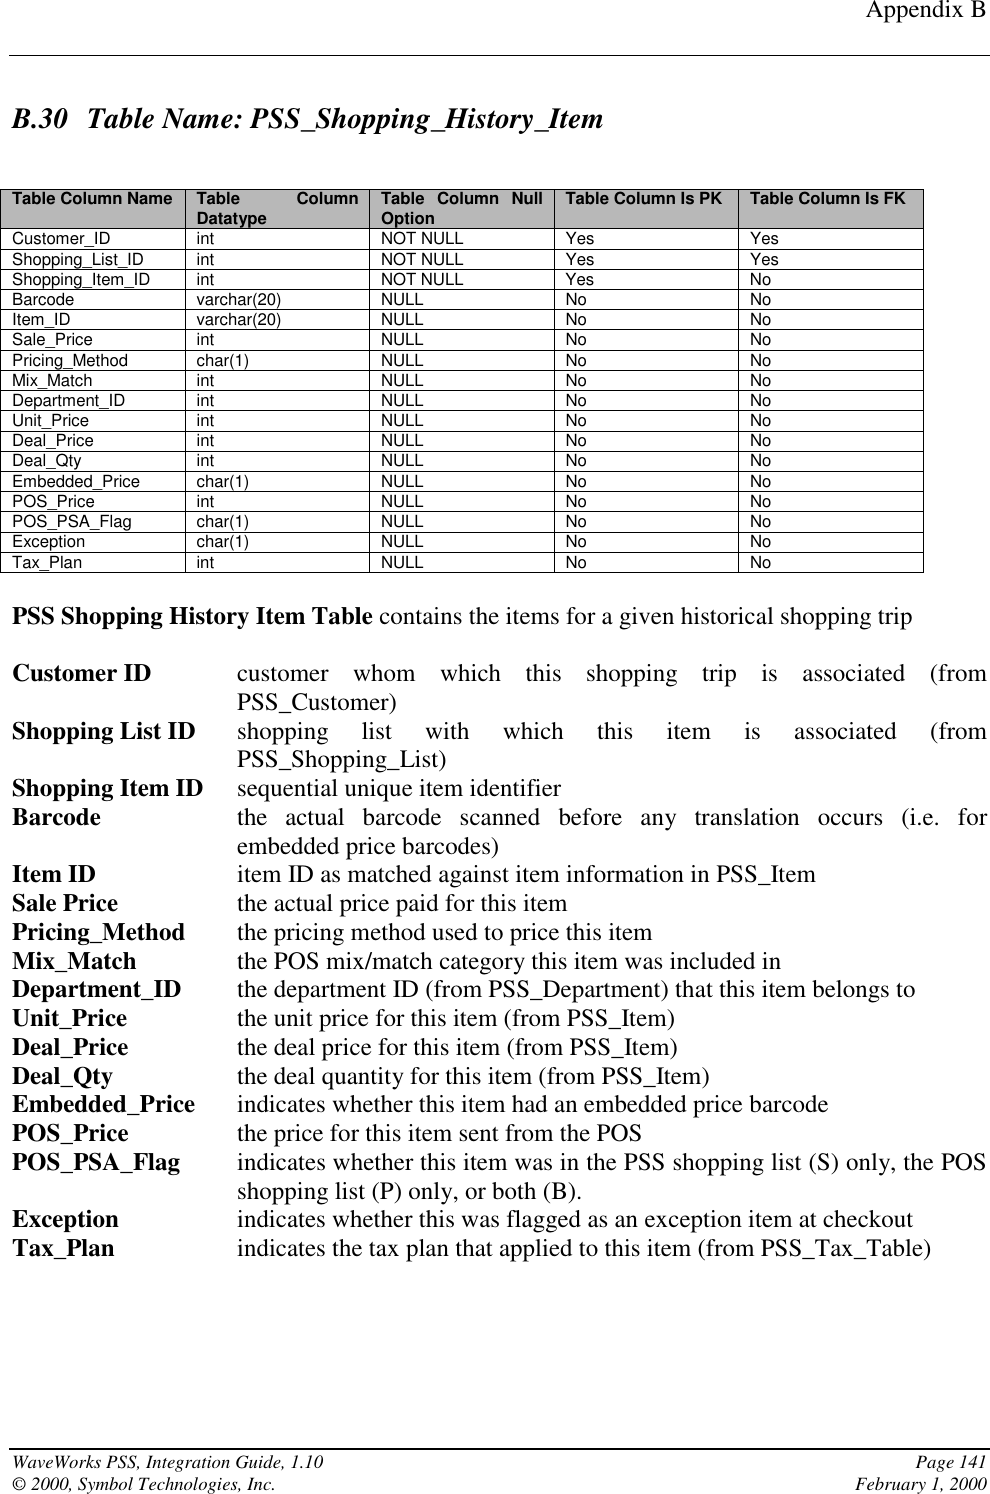 Appendix BWaveWorks PSS, Integration Guide, 1.10 Page 141© 2000, Symbol Technologies, Inc. February 1, 2000B.30 Table Name: PSS_Shopping_History_ItemTable Column Name Table ColumnDatatype Table Column NullOption Table Column Is PK Table Column Is FKCustomer_ID int NOT NULL Yes YesShopping_List_ID int NOT NULL Yes YesShopping_Item_ID int NOT NULL Yes NoBarcode varchar(20) NULL No NoItem_ID varchar(20) NULL No NoSale_Price int NULL No NoPricing_Method char(1) NULL No NoMix_Match int NULL No NoDepartment_ID int NULL No NoUnit_Price int NULL No NoDeal_Price int NULL No NoDeal_Qty int NULL No NoEmbedded_Price char(1) NULL No NoPOS_Price int NULL No NoPOS_PSA_Flag char(1) NULL No NoException char(1) NULL No NoTax_Plan int NULL No NoPSS Shopping History Item Table contains the items for a given historical shopping tripCustomer ID customer whom which this shopping trip is associated (fromPSS_Customer)Shopping List ID shopping list with which this item is associated (fromPSS_Shopping_List)Shopping Item ID sequential unique item identifierBarcode the actual barcode scanned before any translation occurs (i.e. forembedded price barcodes)Item ID item ID as matched against item information in PSS_ItemSale Price the actual price paid for this itemPricing_Method the pricing method used to price this itemMix_Match the POS mix/match category this item was included inDepartment_ID the department ID (from PSS_Department) that this item belongs toUnit_Price the unit price for this item (from PSS_Item)Deal_Price the deal price for this item (from PSS_Item)Deal_Qty the deal quantity for this item (from PSS_Item)Embedded_Price indicates whether this item had an embedded price barcodePOS_Price the price for this item sent from the POSPOS_PSA_Flag indicates whether this item was in the PSS shopping list (S) only, the POSshopping list (P) only, or both (B).Exception indicates whether this was flagged as an exception item at checkoutTax_Plan indicates the tax plan that applied to this item (from PSS_Tax_Table)